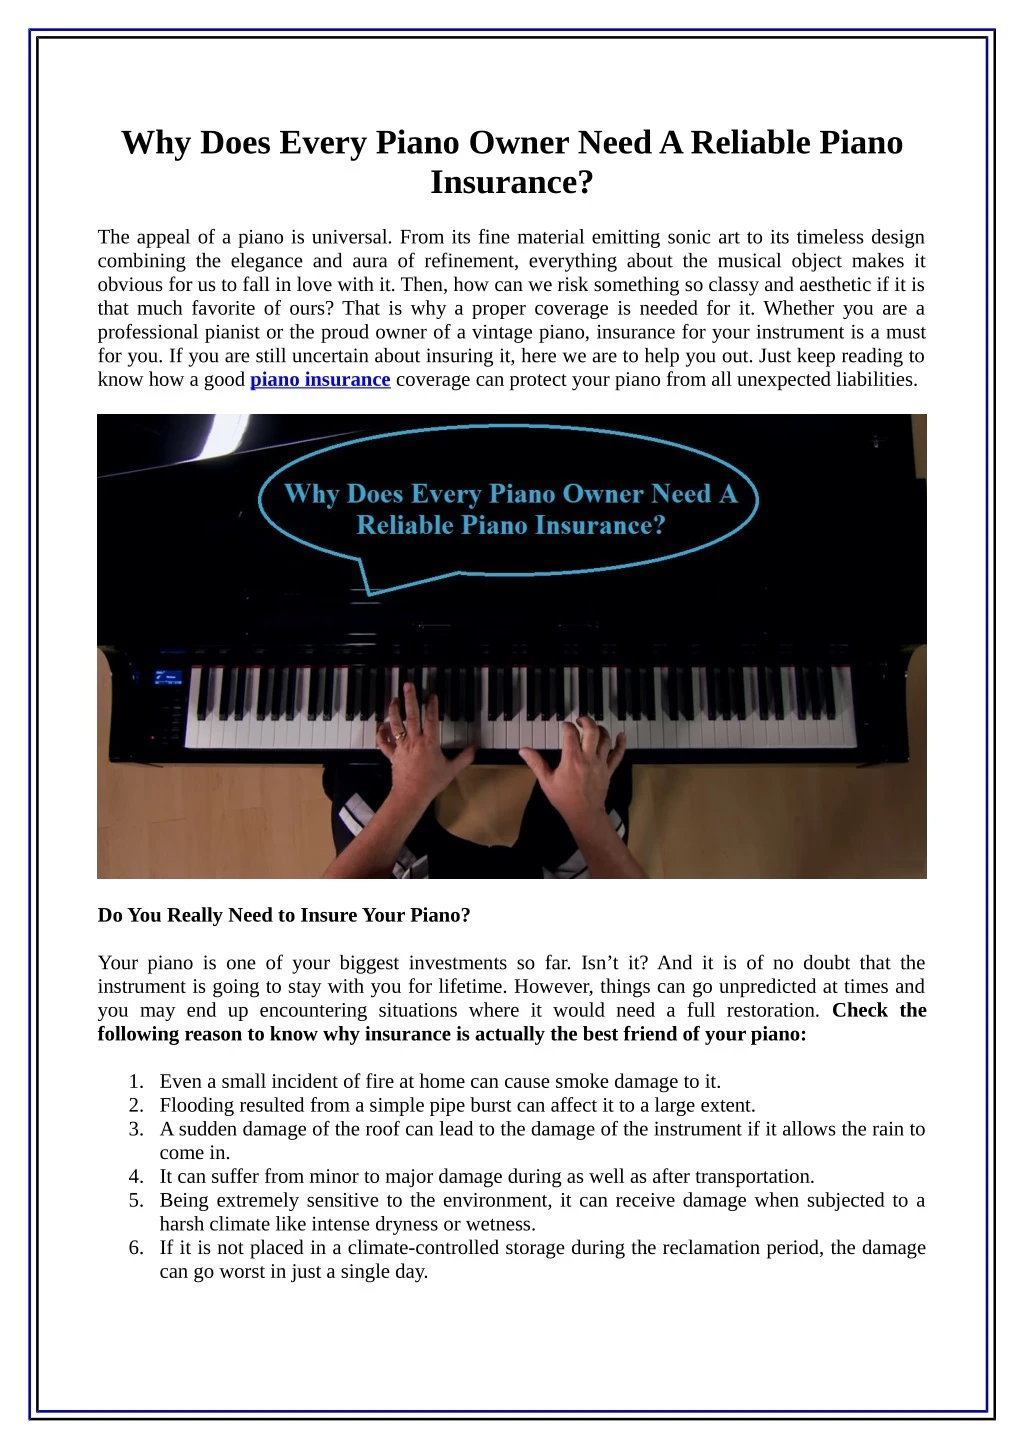 why does every piano owner need a reliable piano